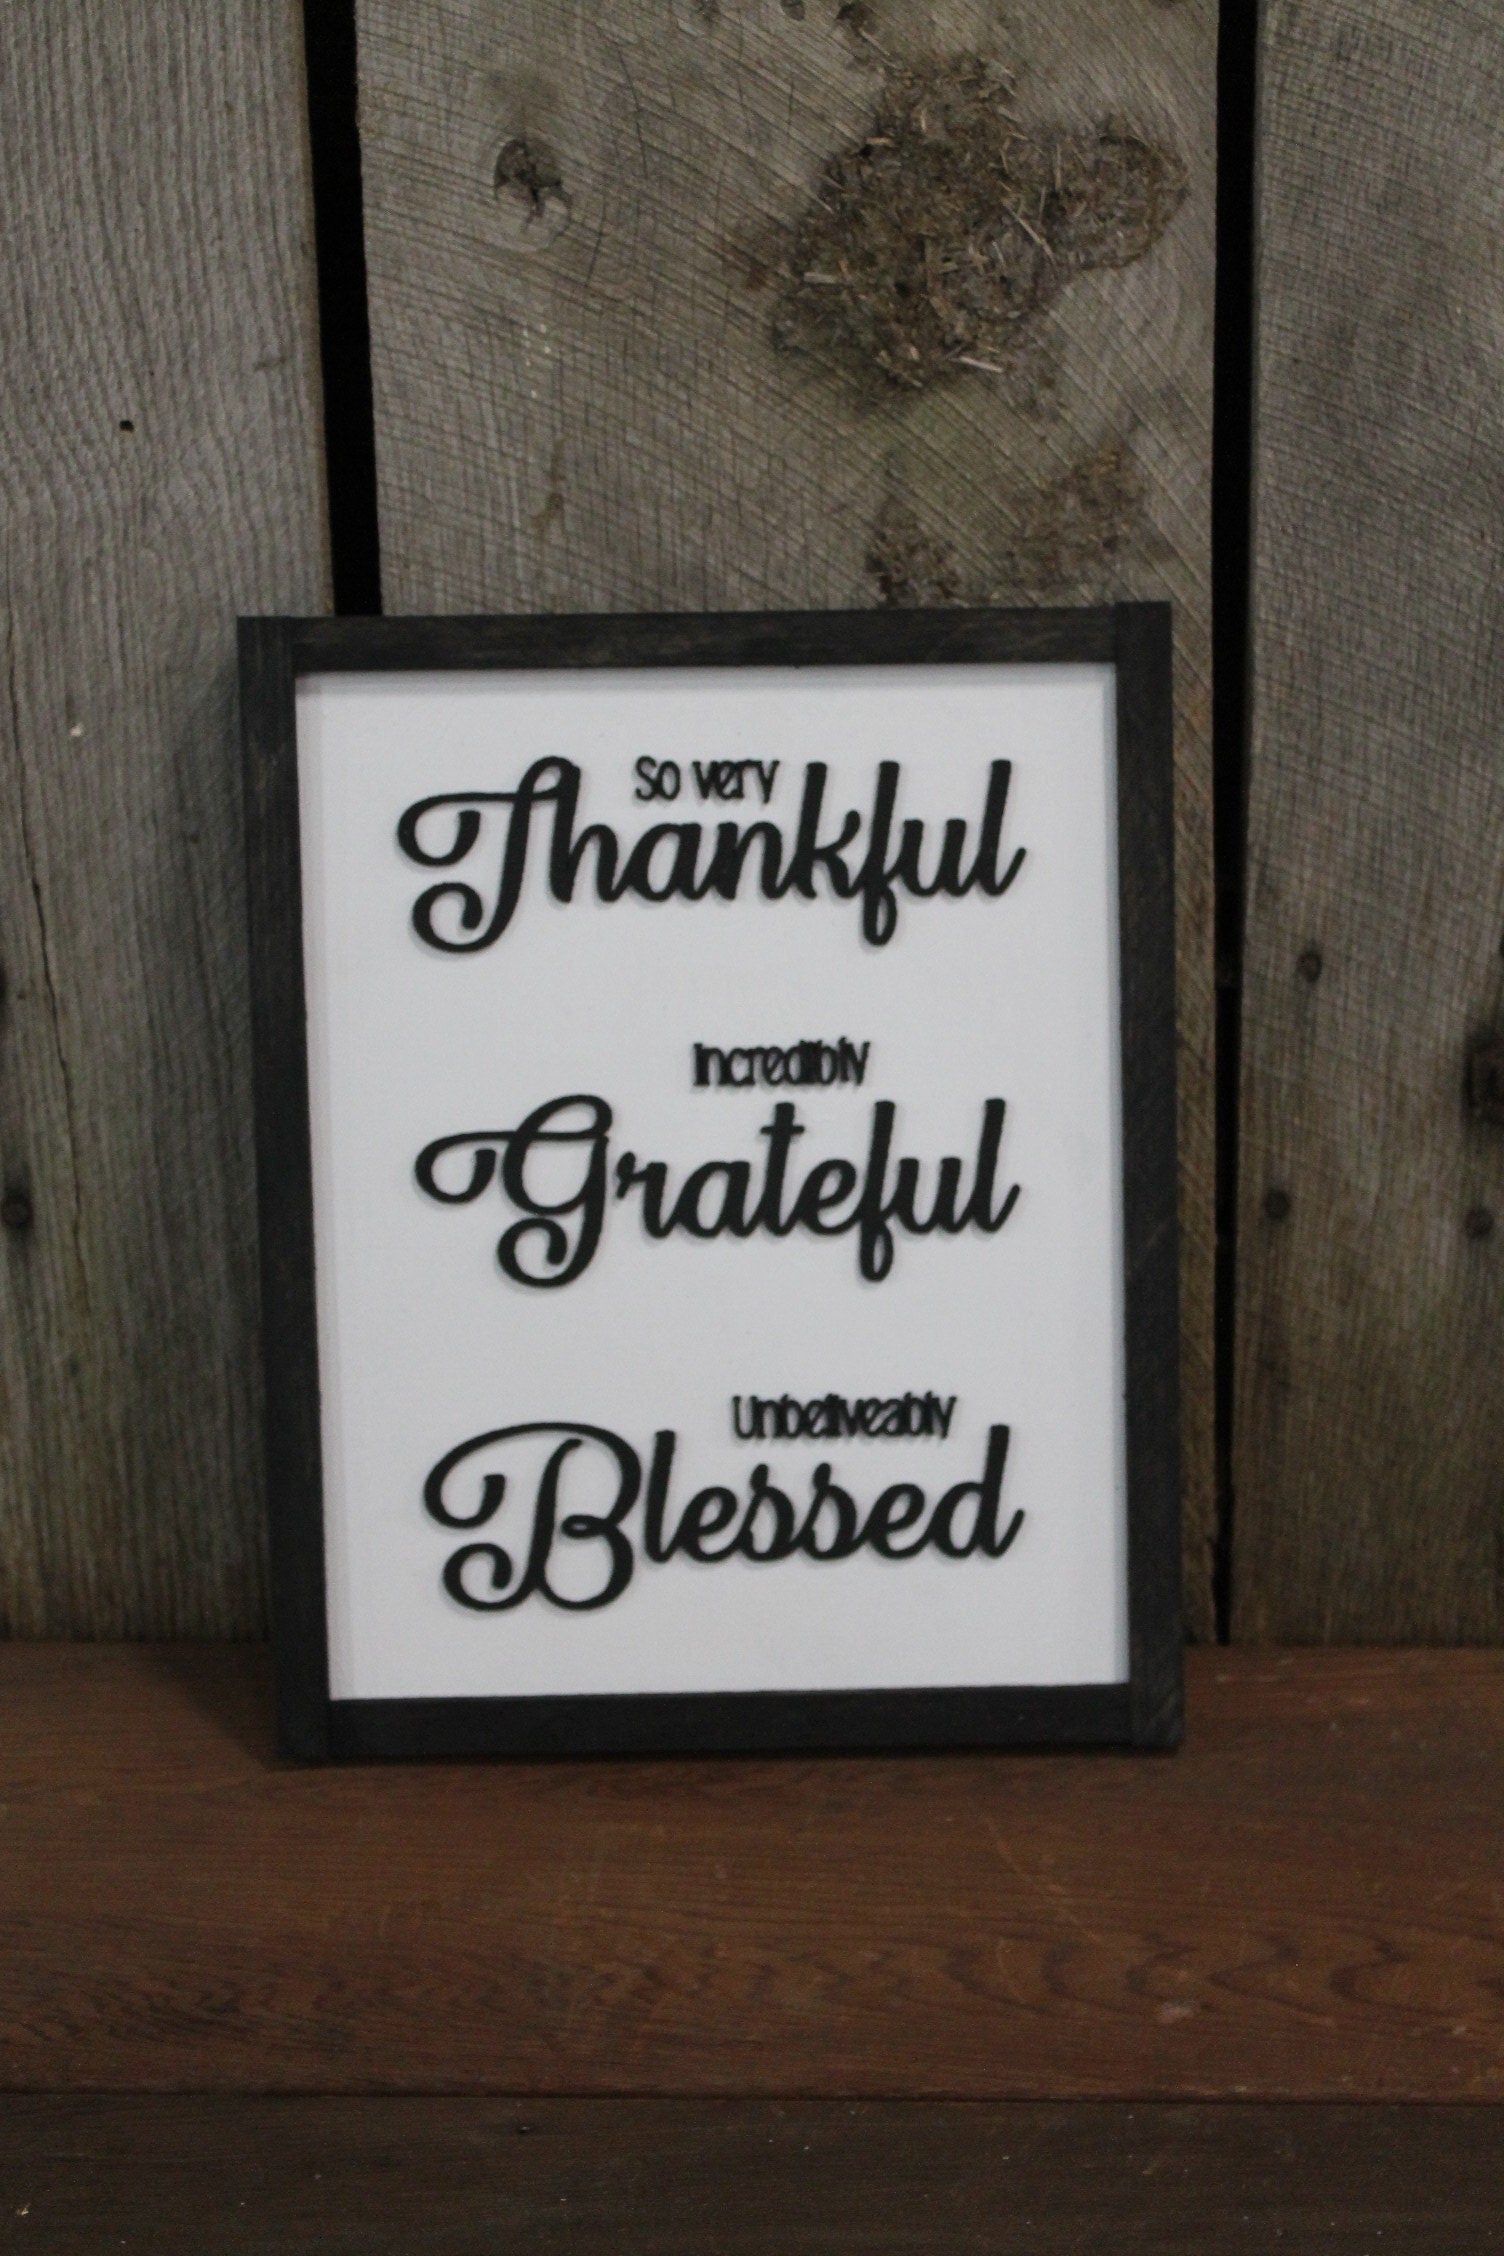 Thankful Grateful Blessed Sign 3D Raised Text Large Wood Framed Black and White Primitive Wall Decor Thanksgiving